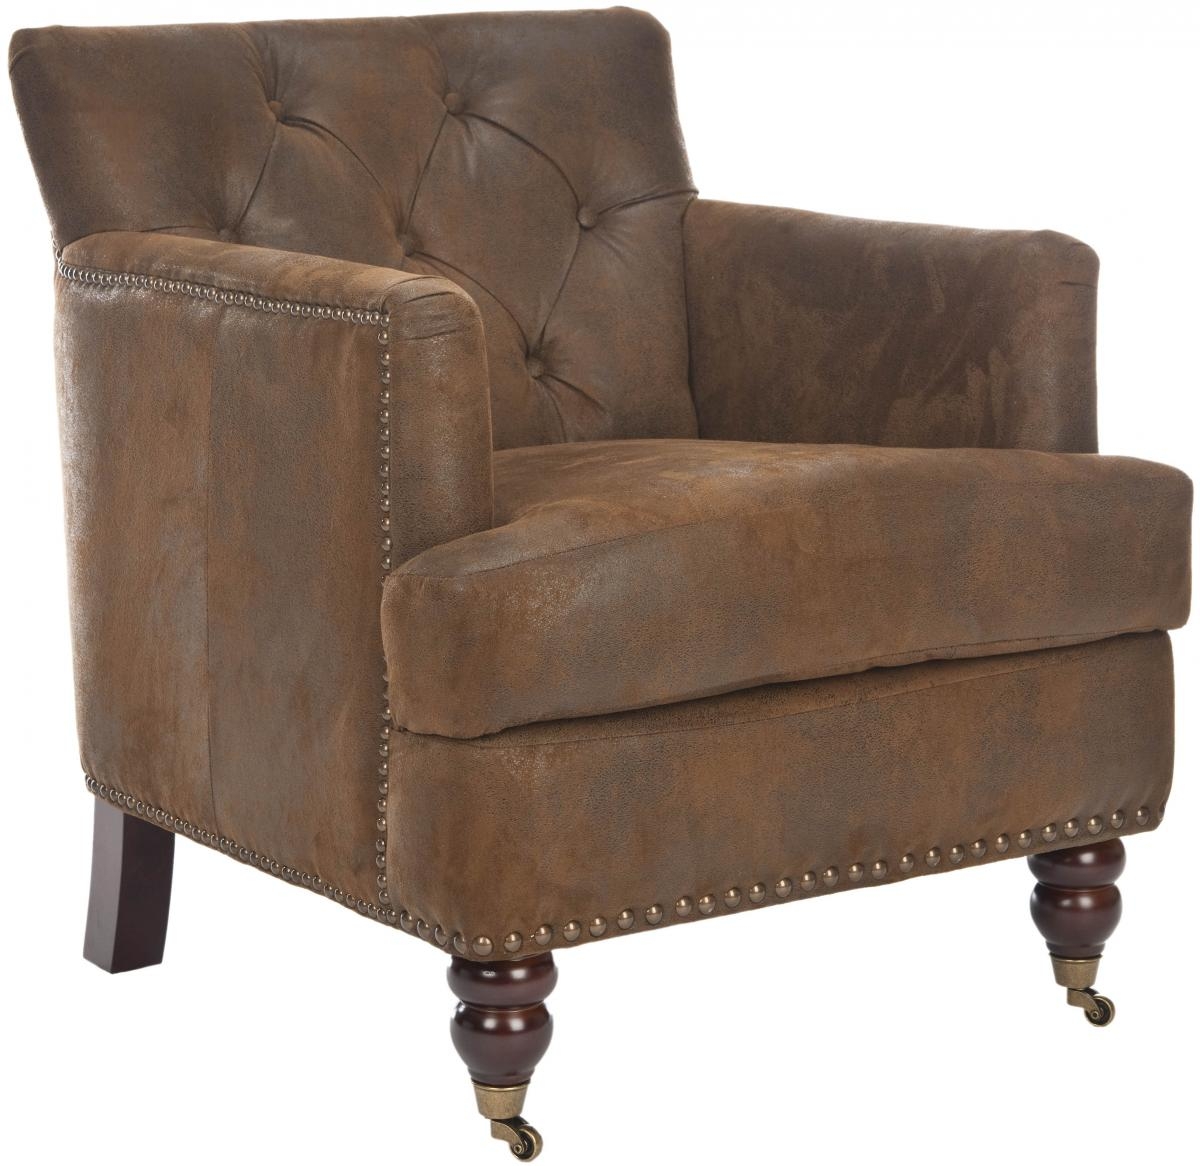 Colin Tufted Club Chair - Brown/Cherry Mahogany - Arlo Home - Image 0